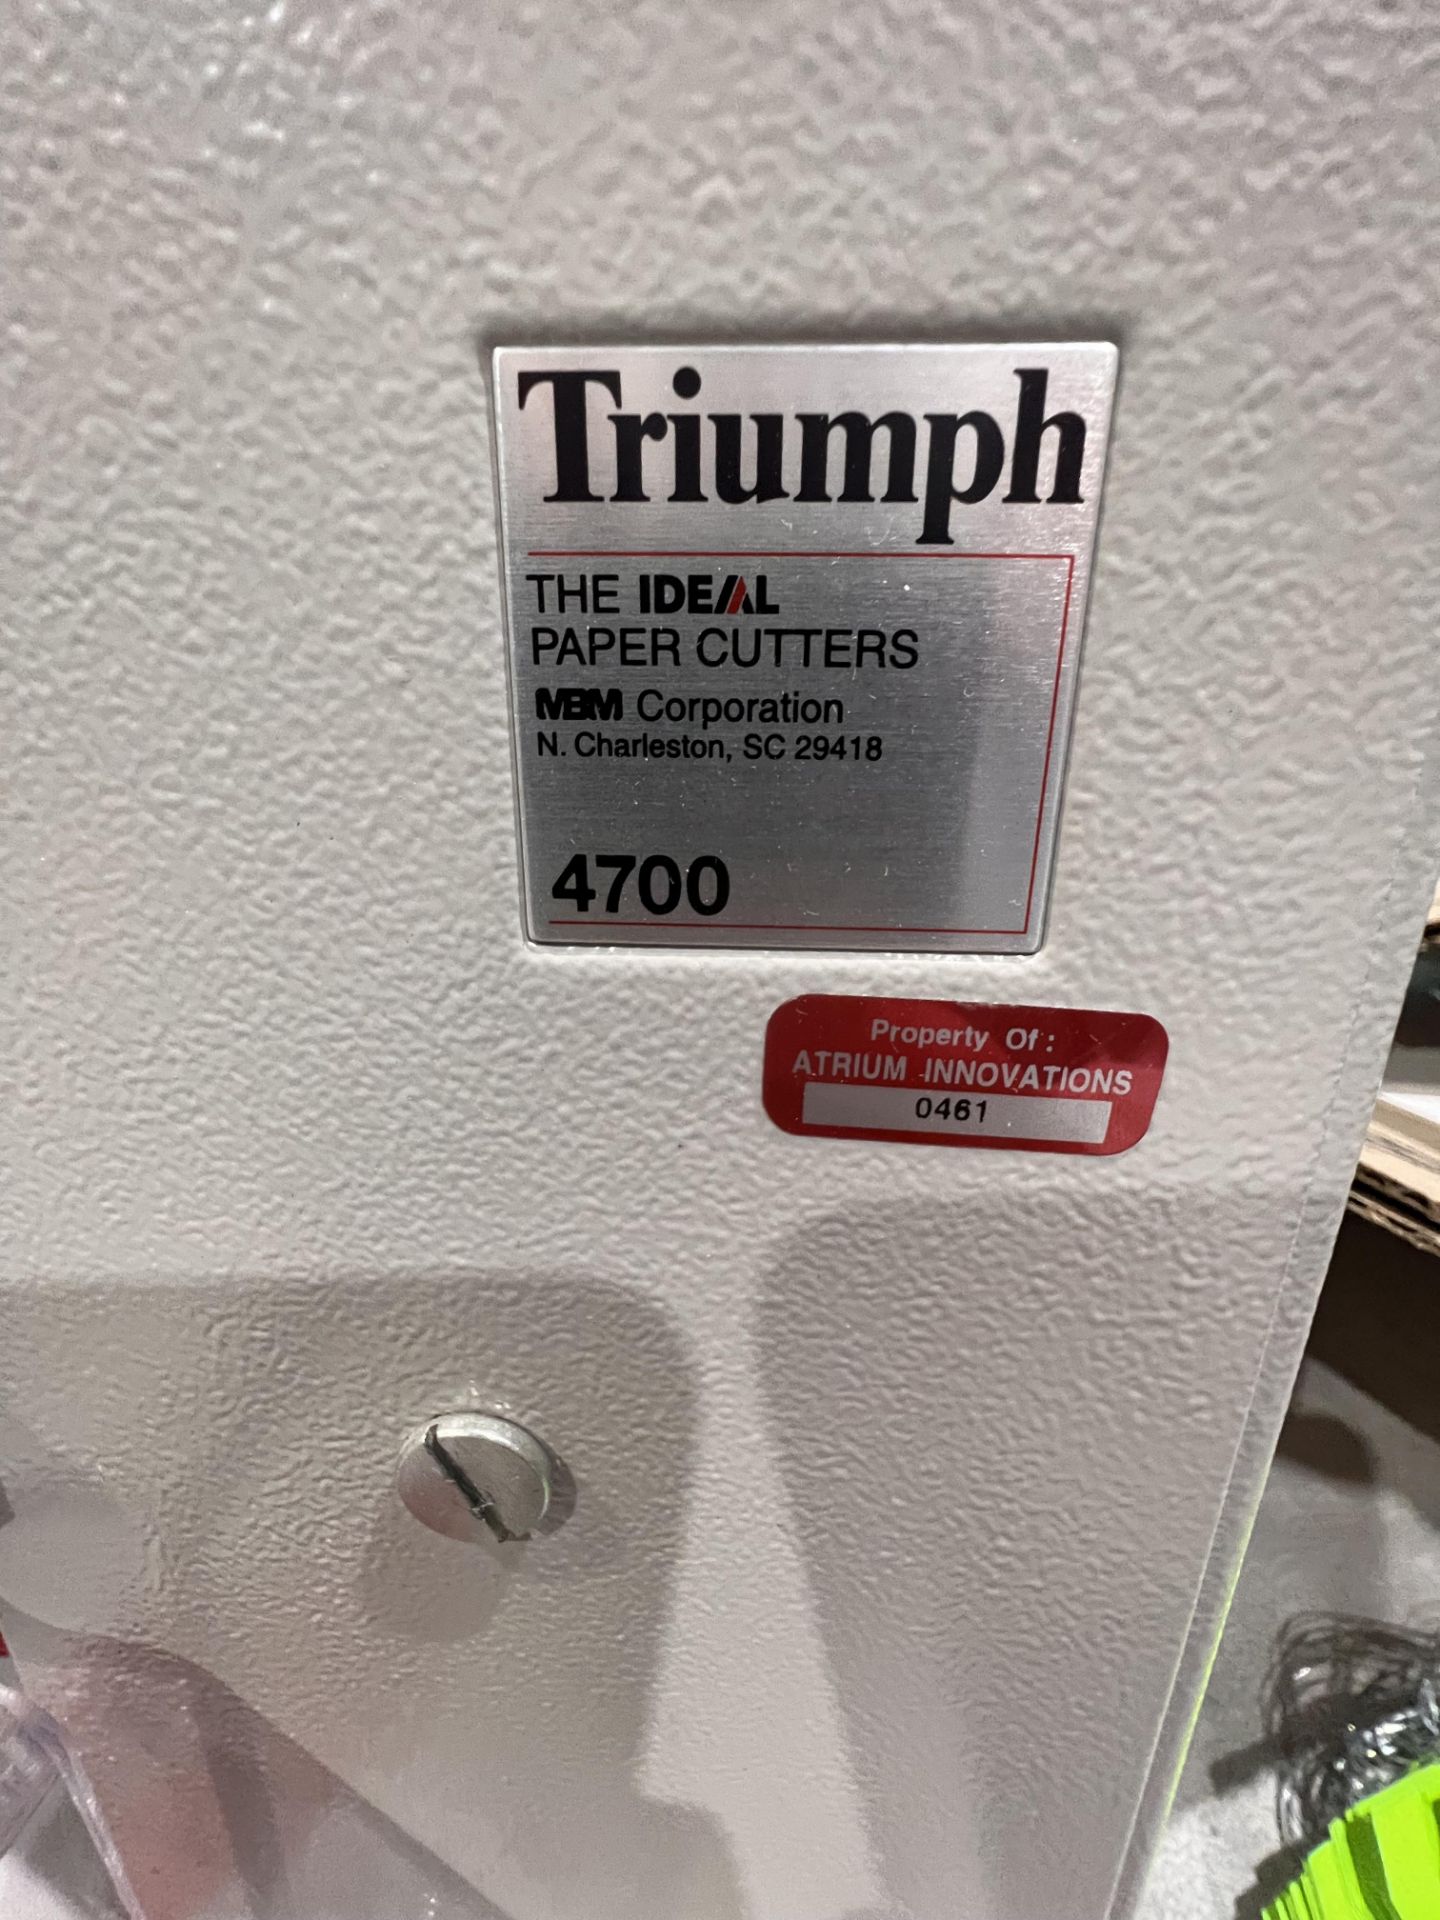 TRIUMPH MANUAL PAPER CUTTER, MODEL 4700 (NEW COST ESTIMATED AT $3,990.00) - Image 2 of 3